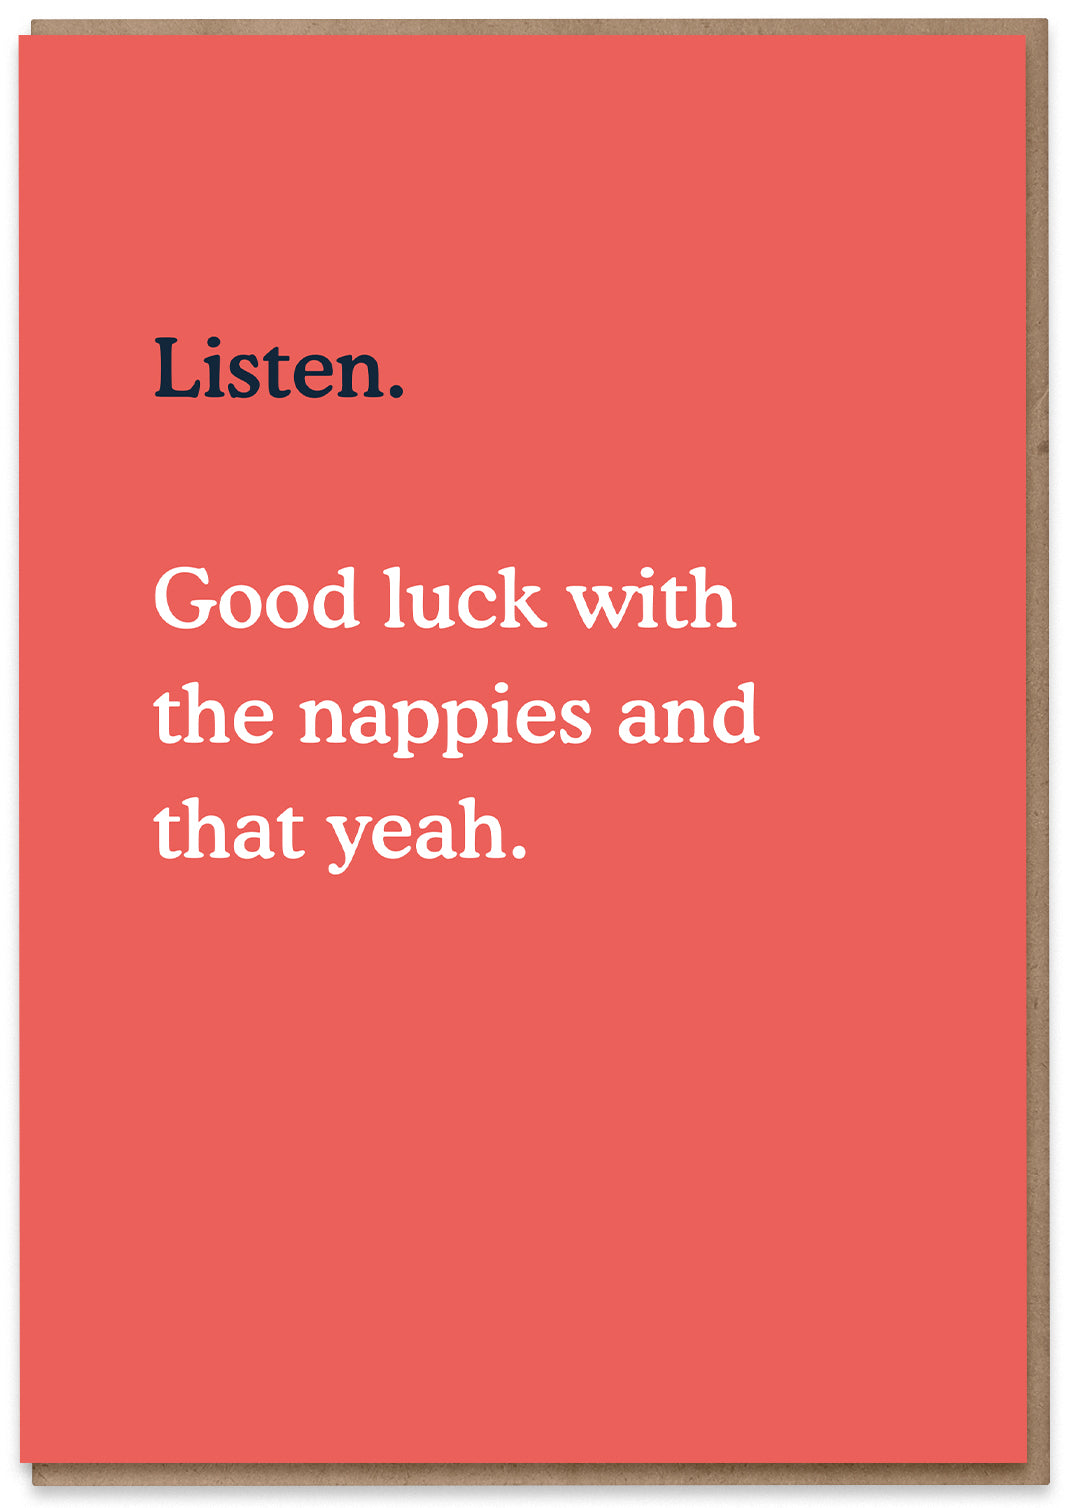 Good Luck with Nappies